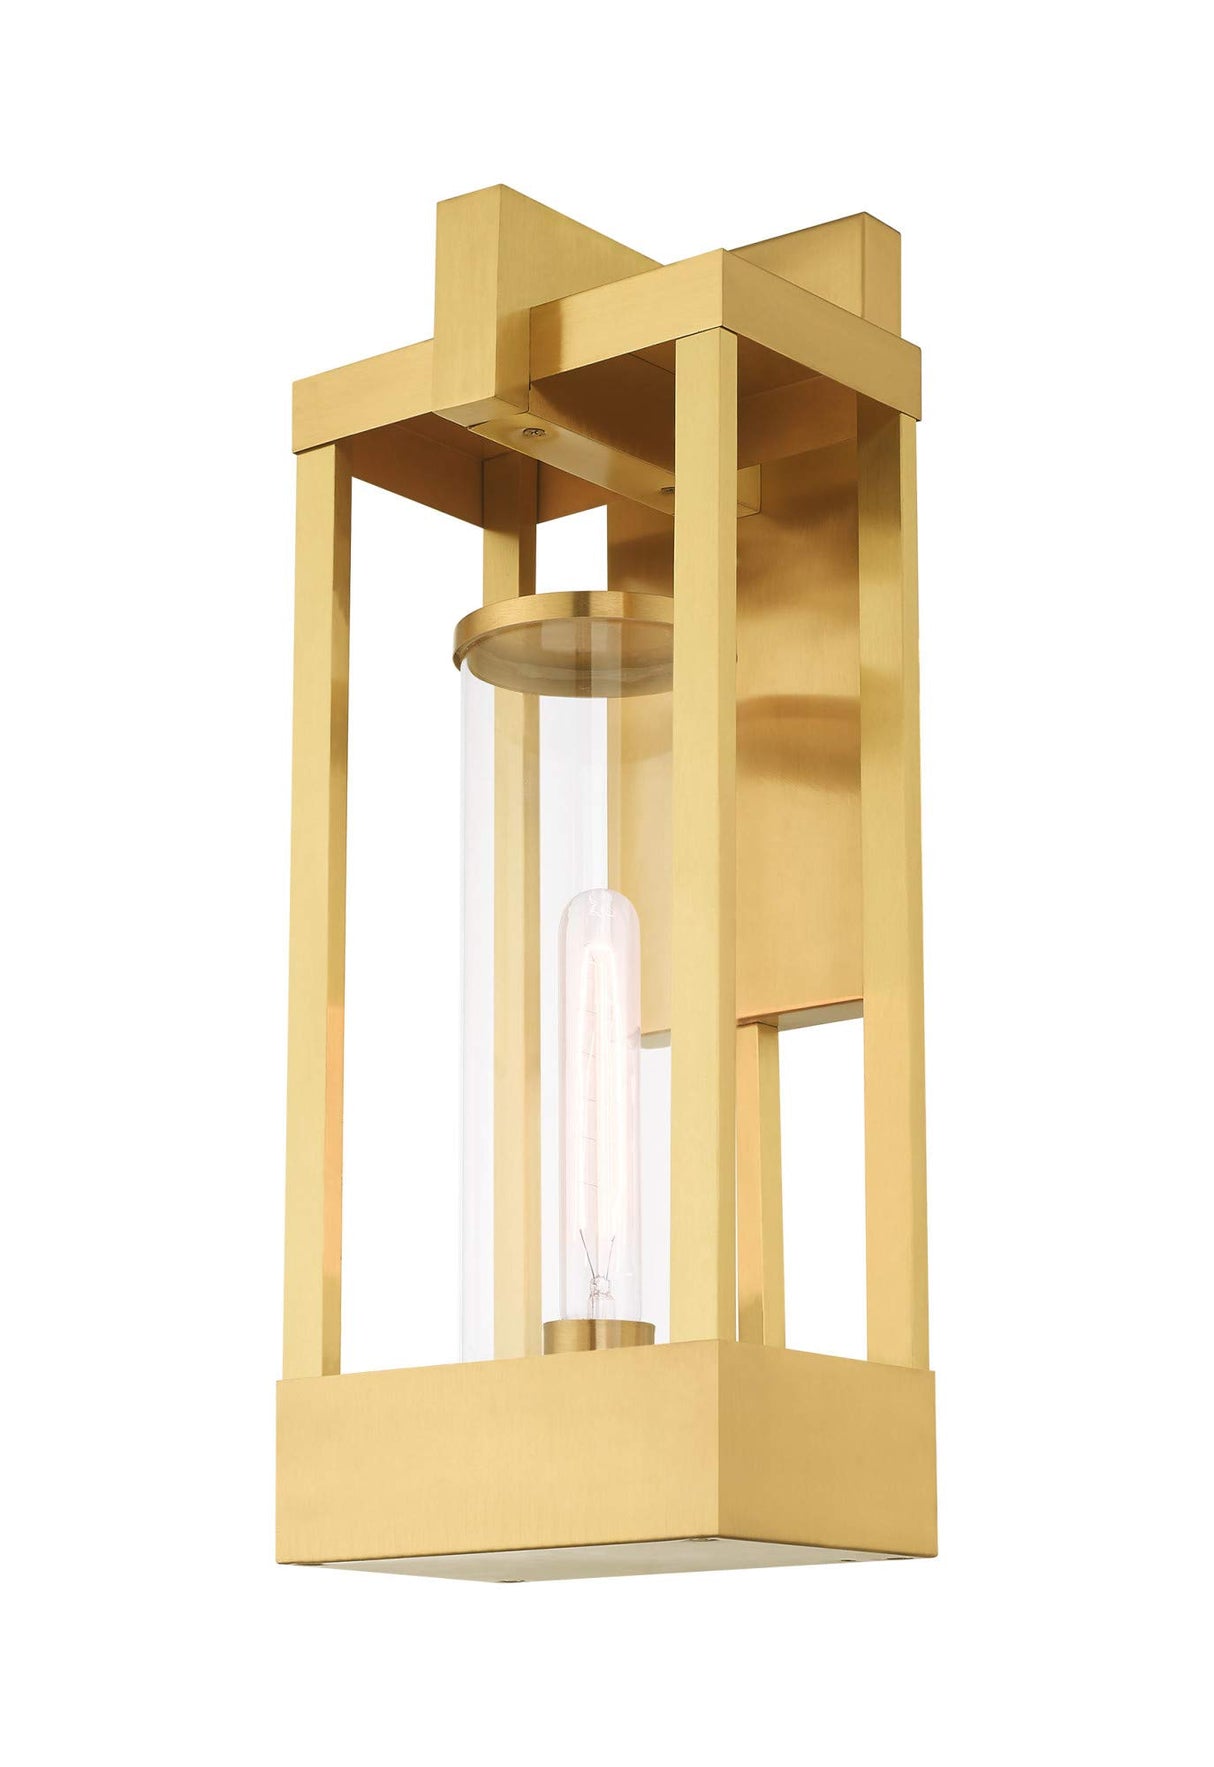 Livex Lighting 20993-91 Delancey - 20" One Light Outdoor Wall Lantern, Brushed Nickel Finish with Clear Glass